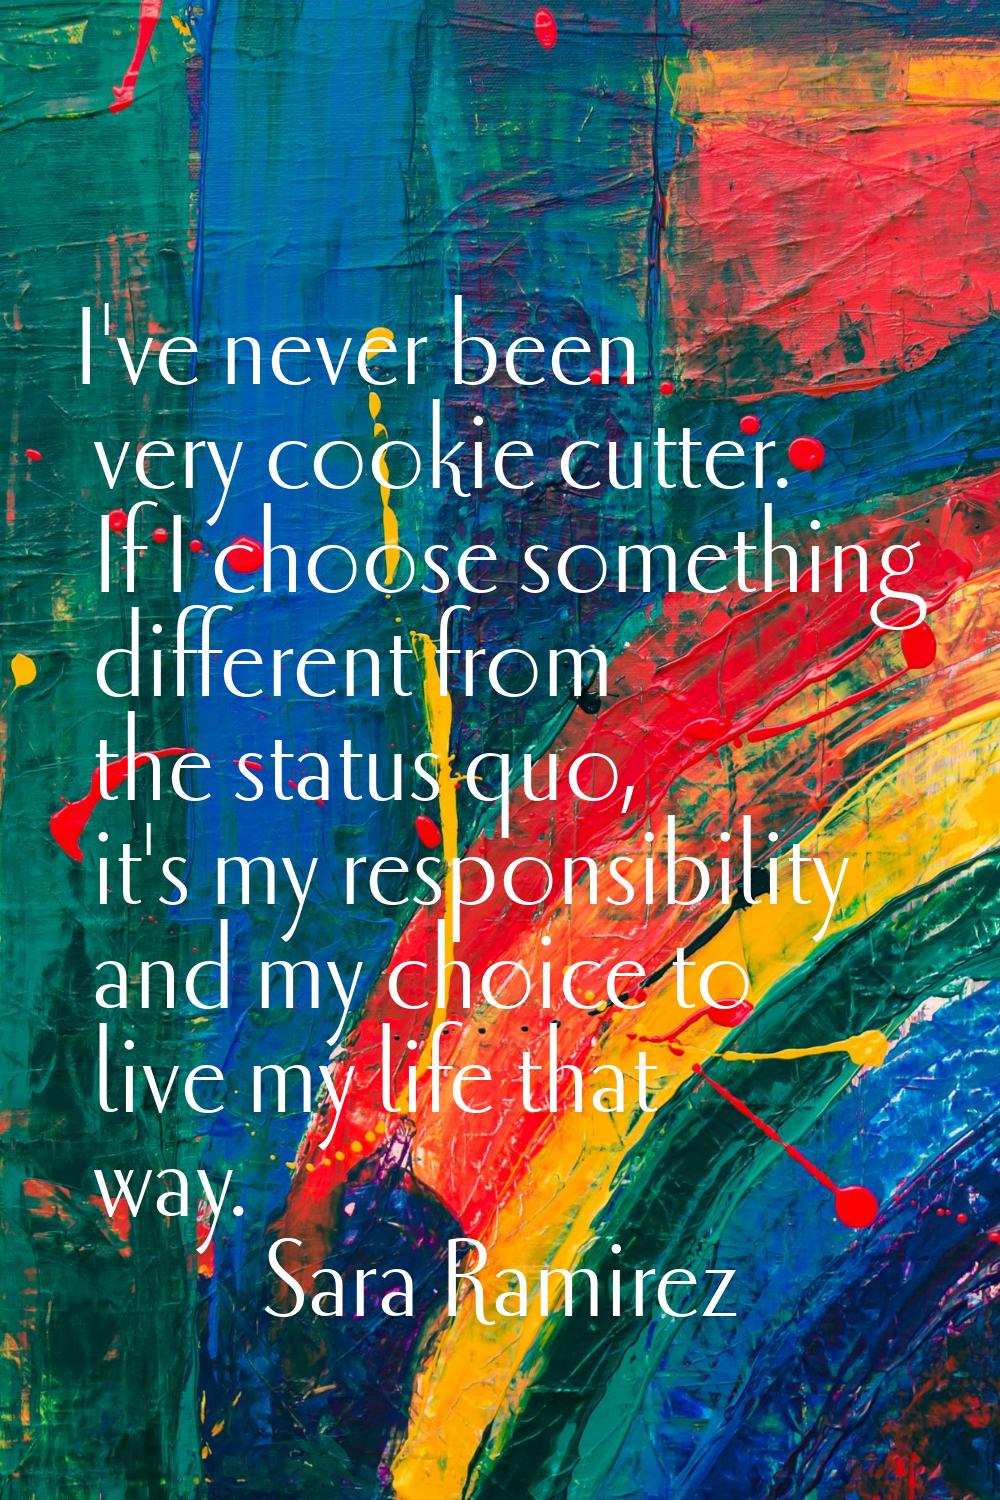 I've never been very cookie cutter. If I choose something different from the status quo, it's my re